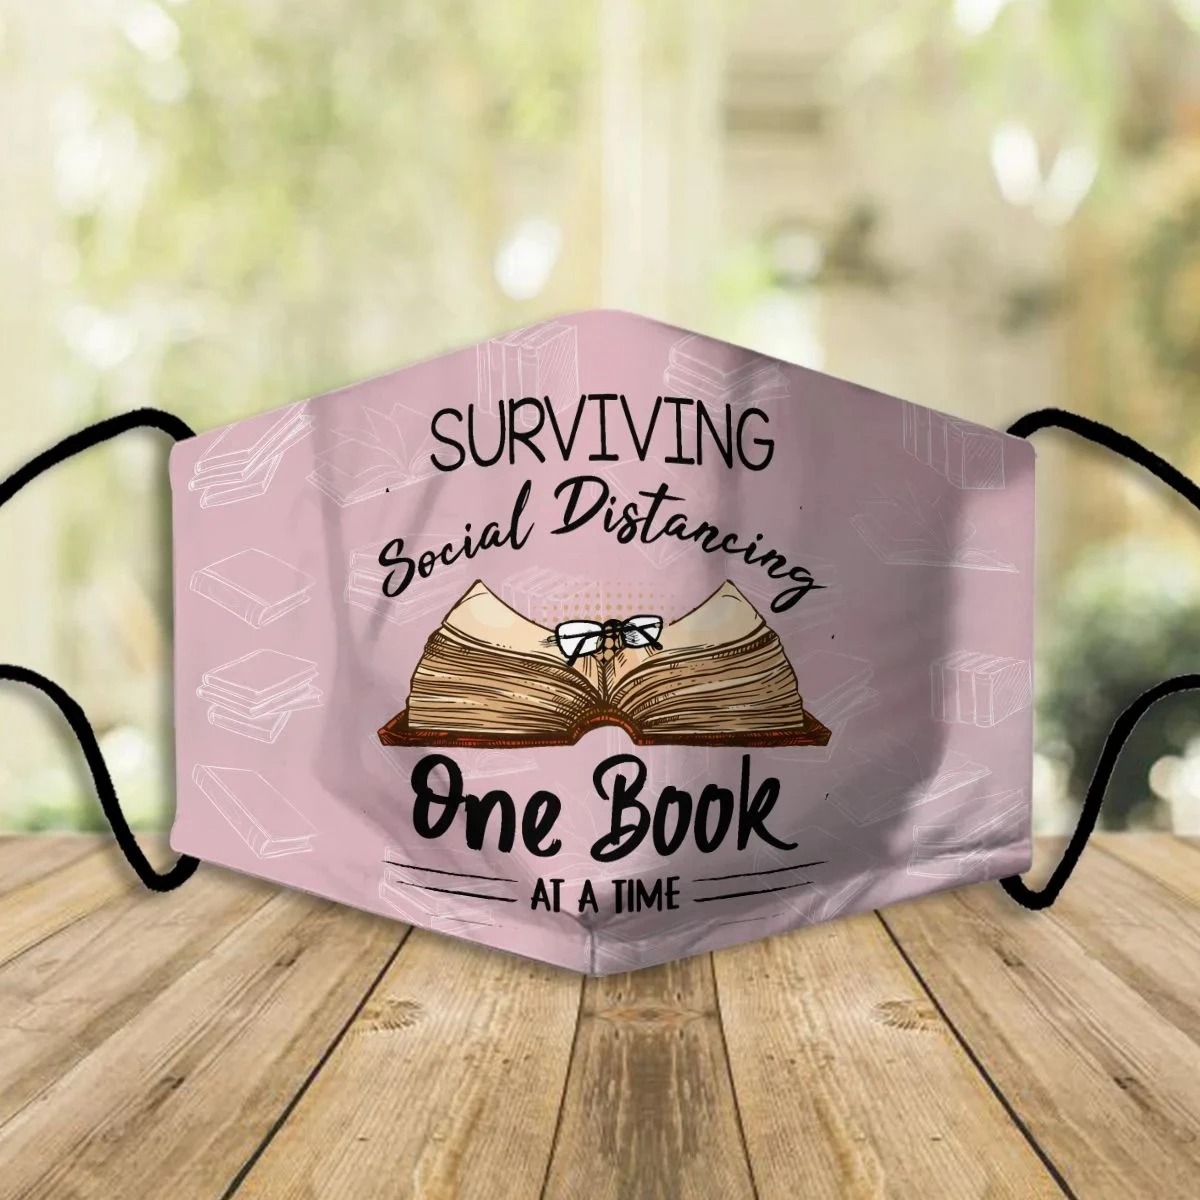 Surviving-social-distancing-one-book-at-a-time-face-mask